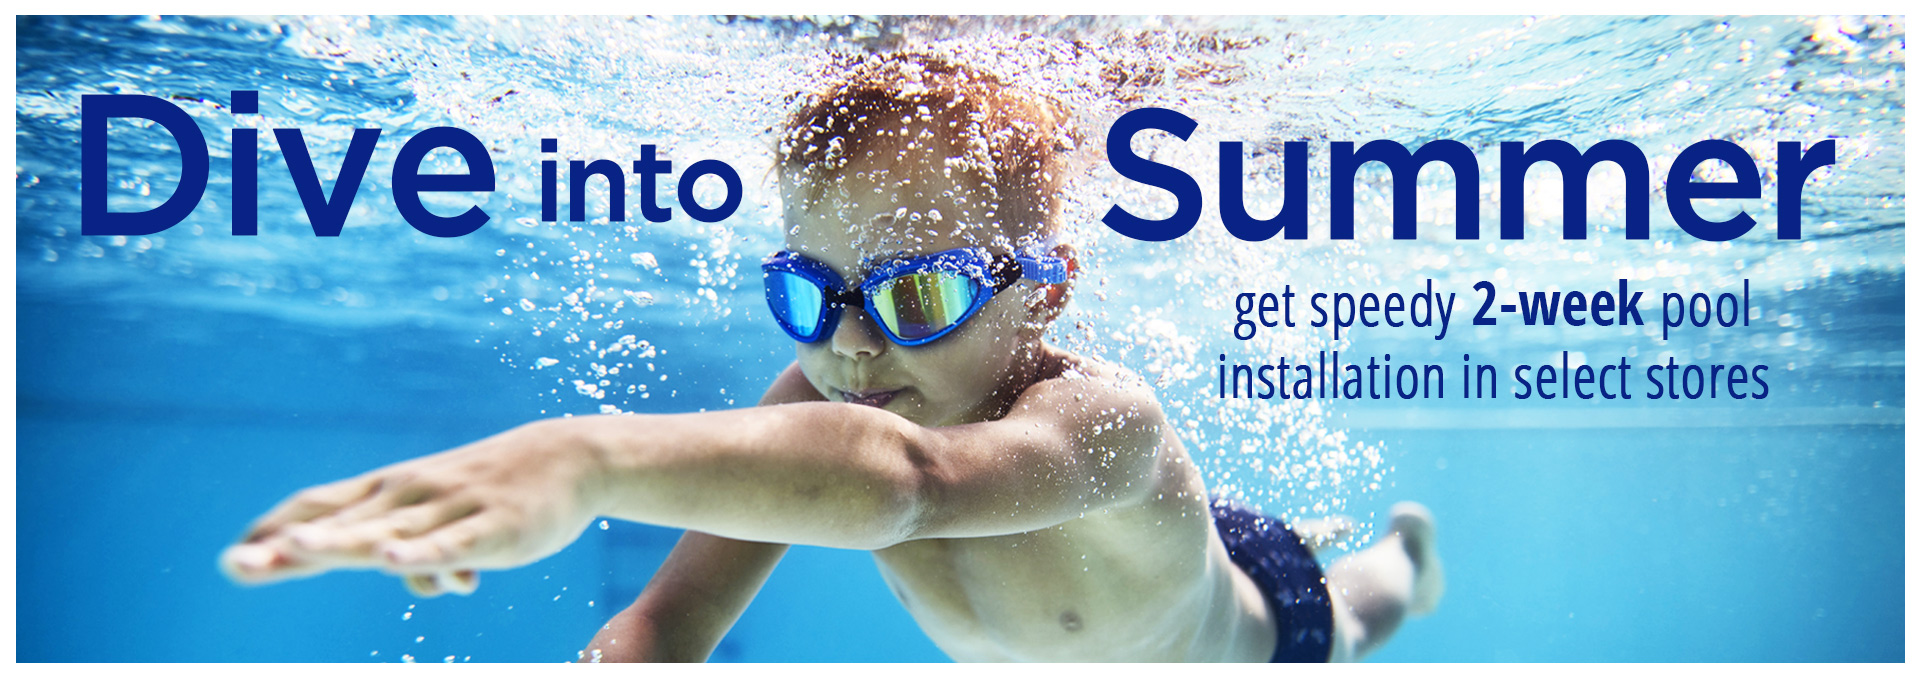 Dive into Summer: get speedy 2-week pool installation in select stores